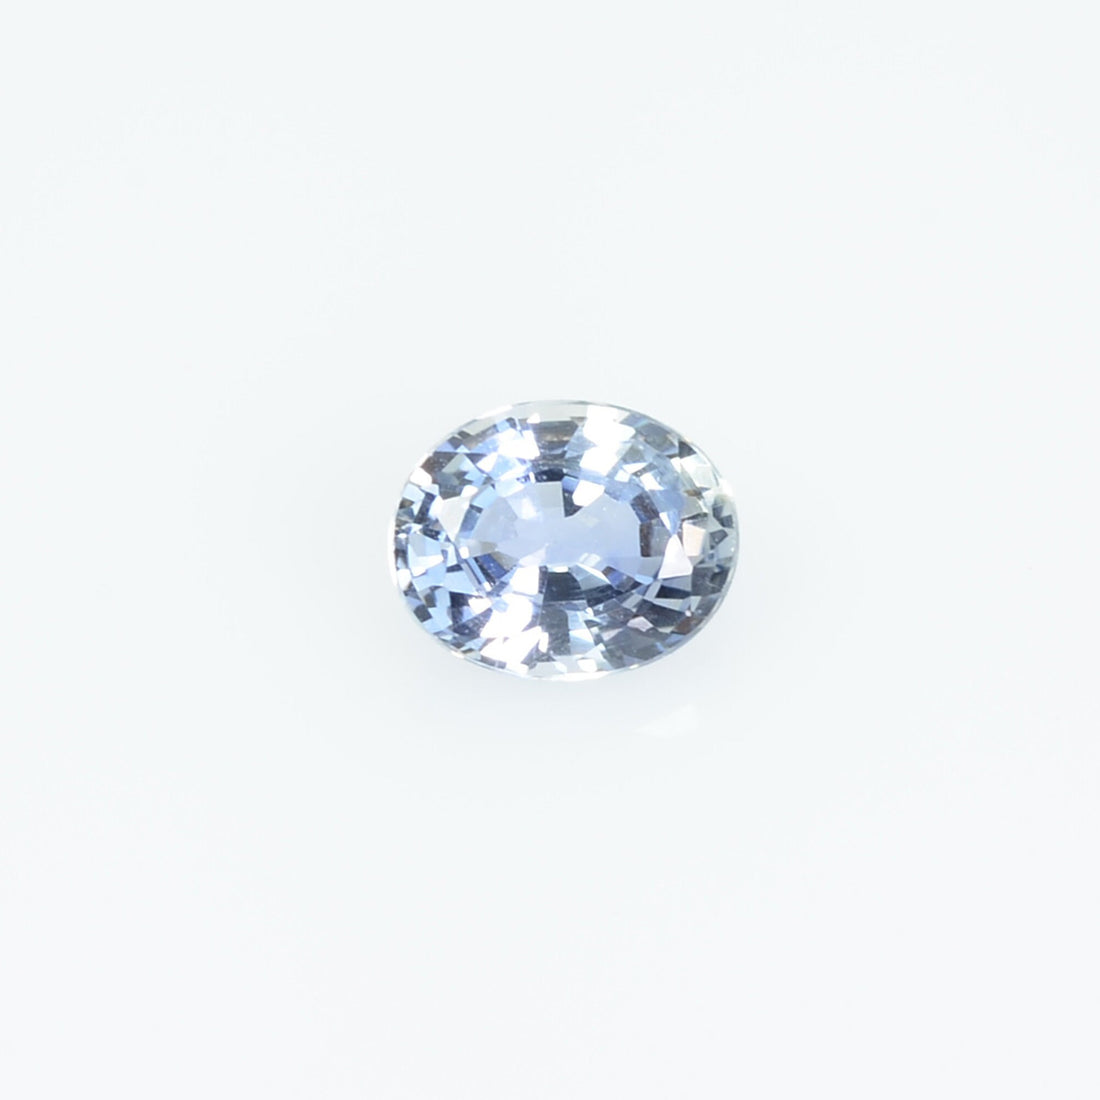 0.38 Cts Natural Blue Sapphire loose gemstone oval cut